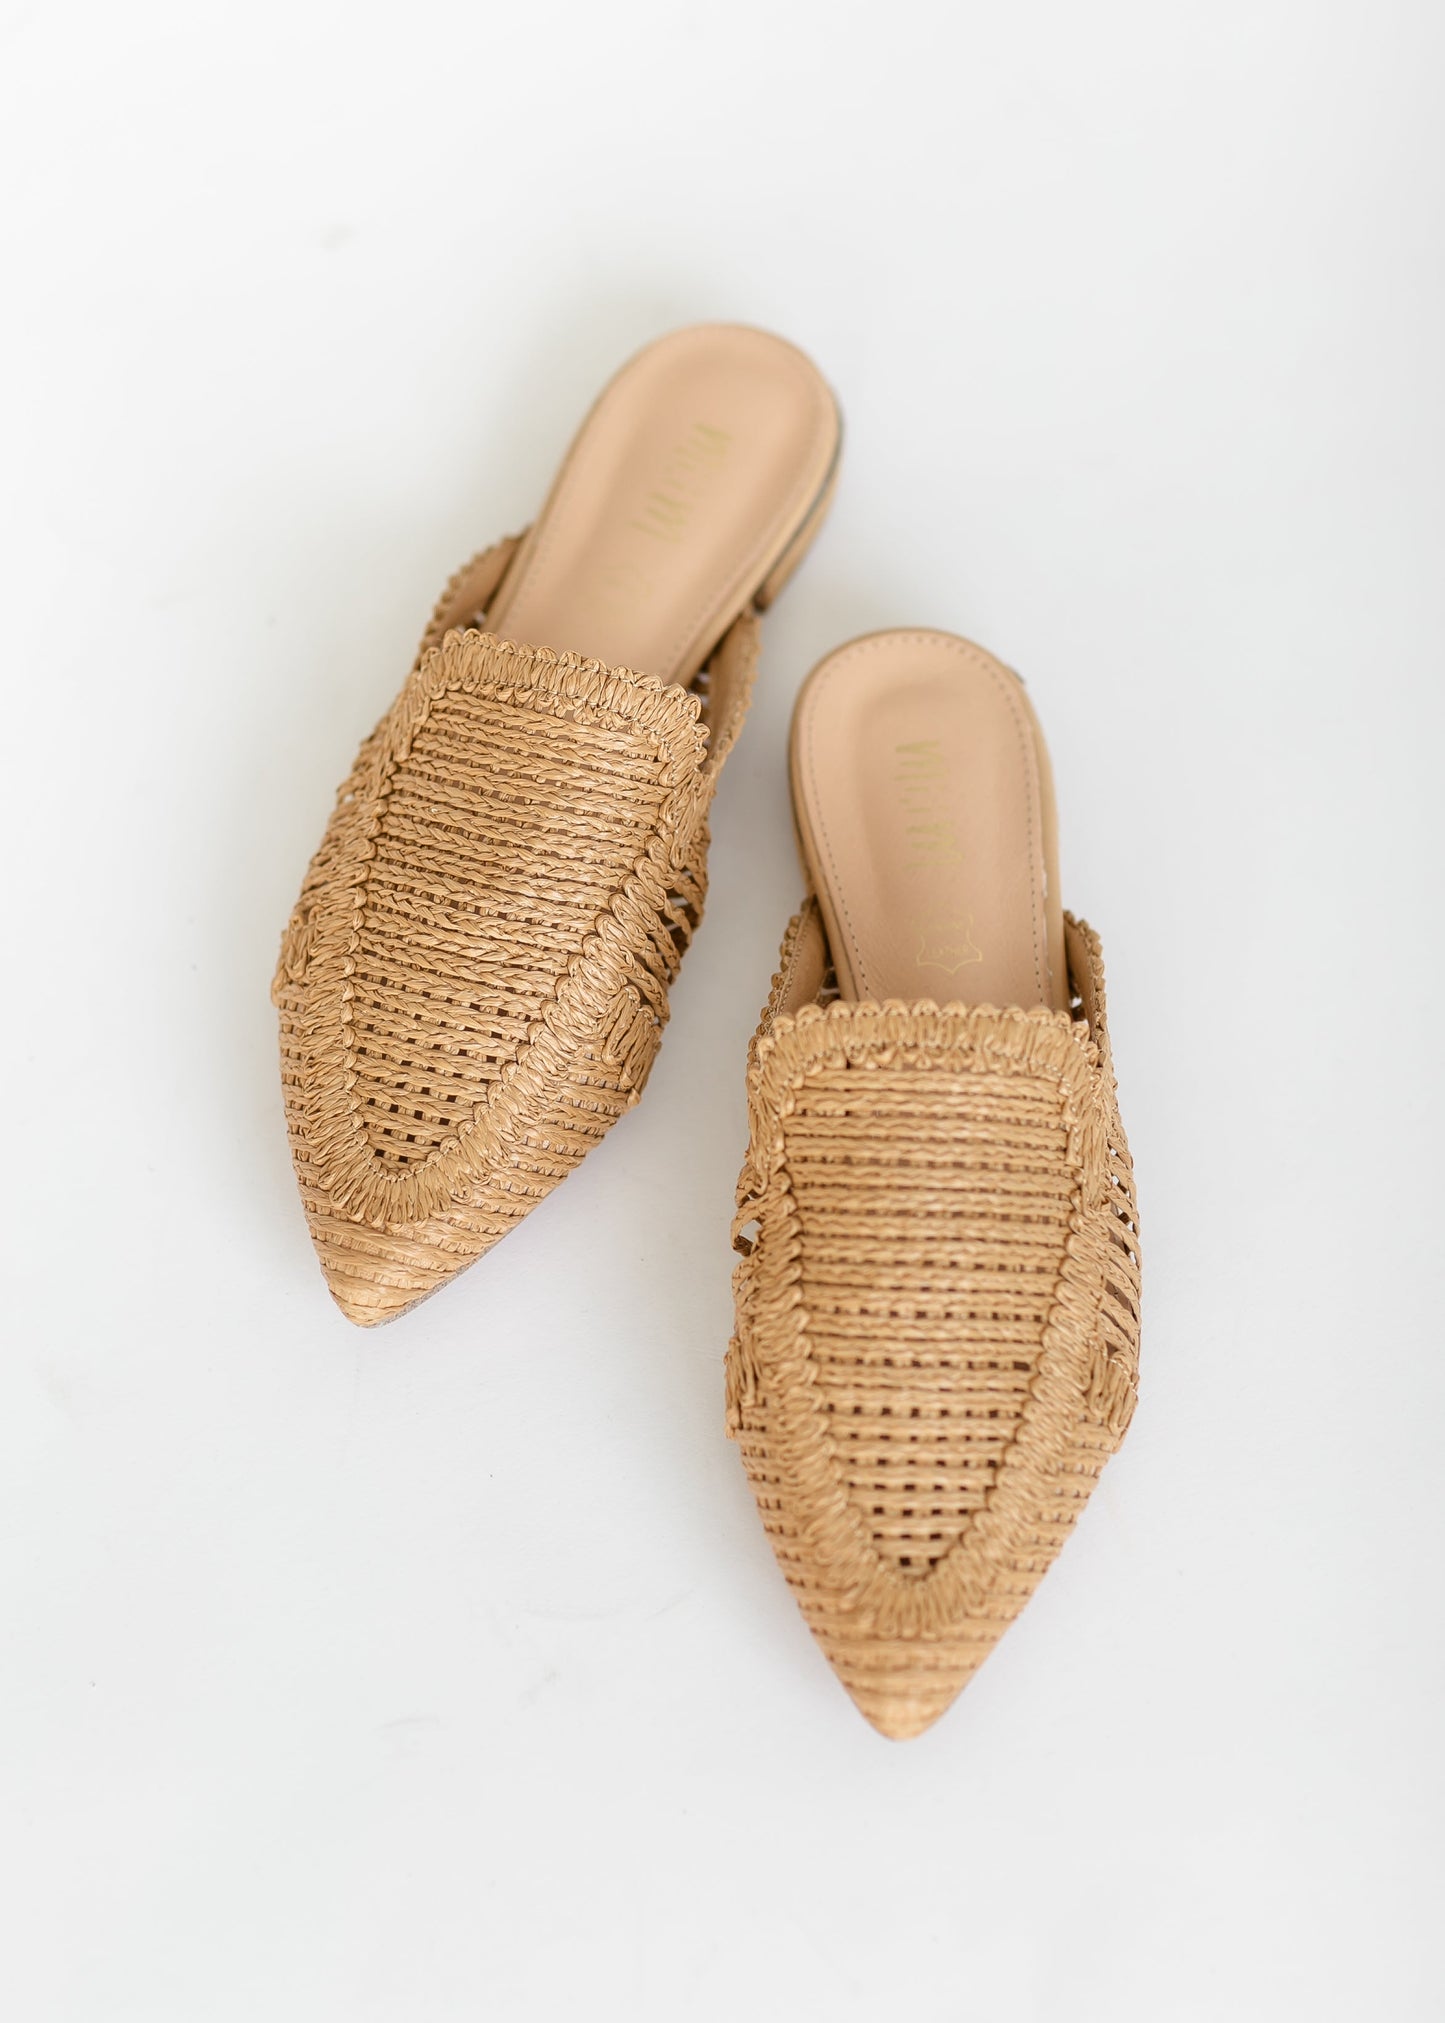 Braided Straw Pointed Toe Mule Shoes